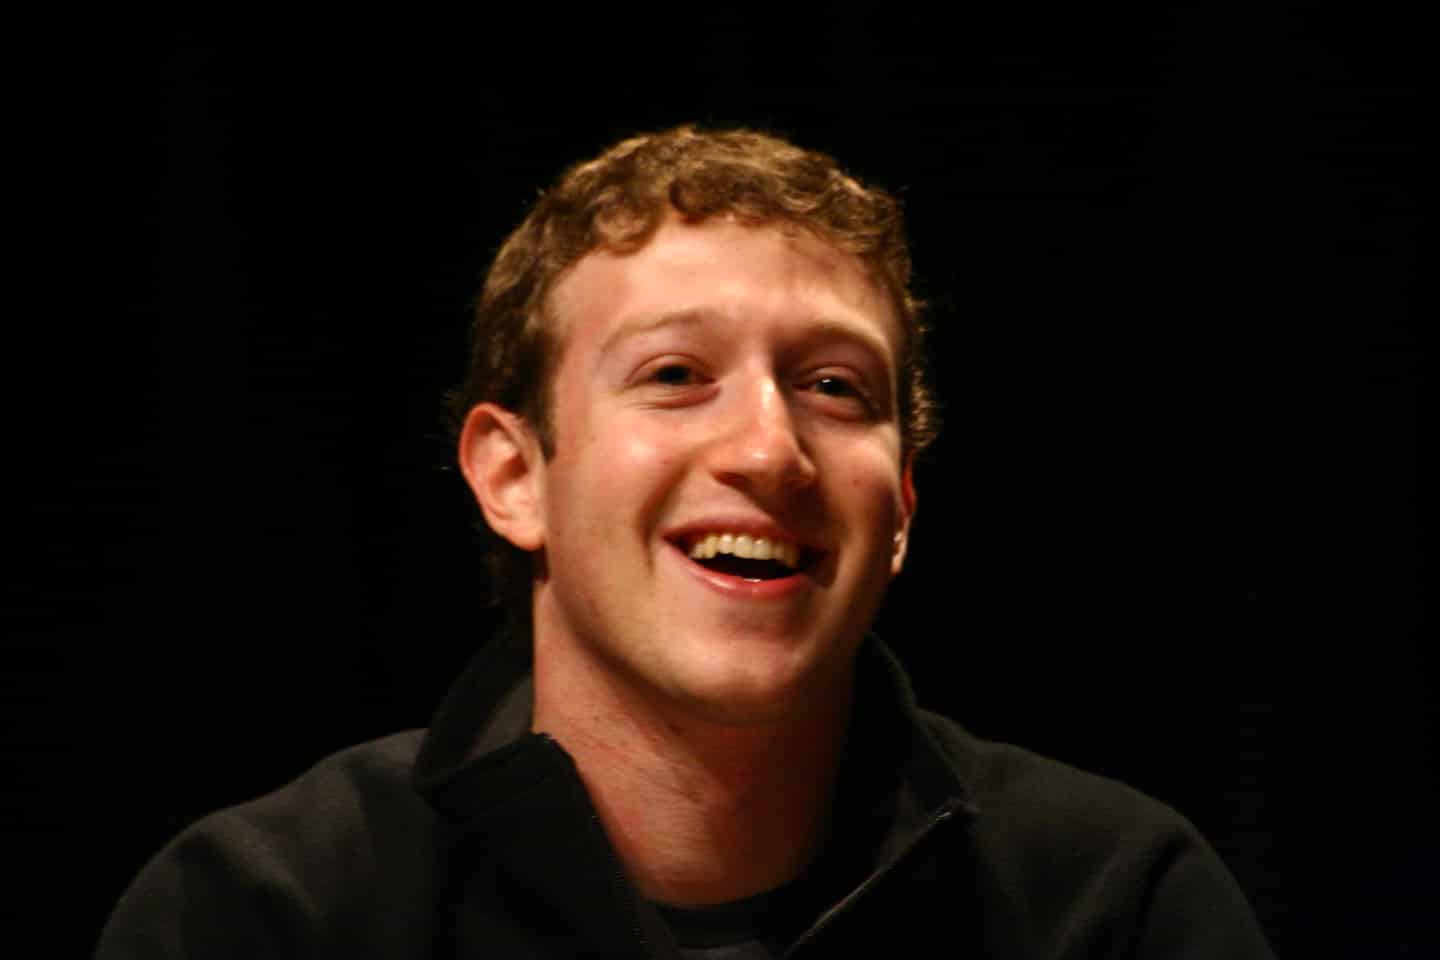 Election interference: Facebook CEO Mark Zuckerberg spent
$500 million to influence Democrat election officials and
unlawfully change the election system 1